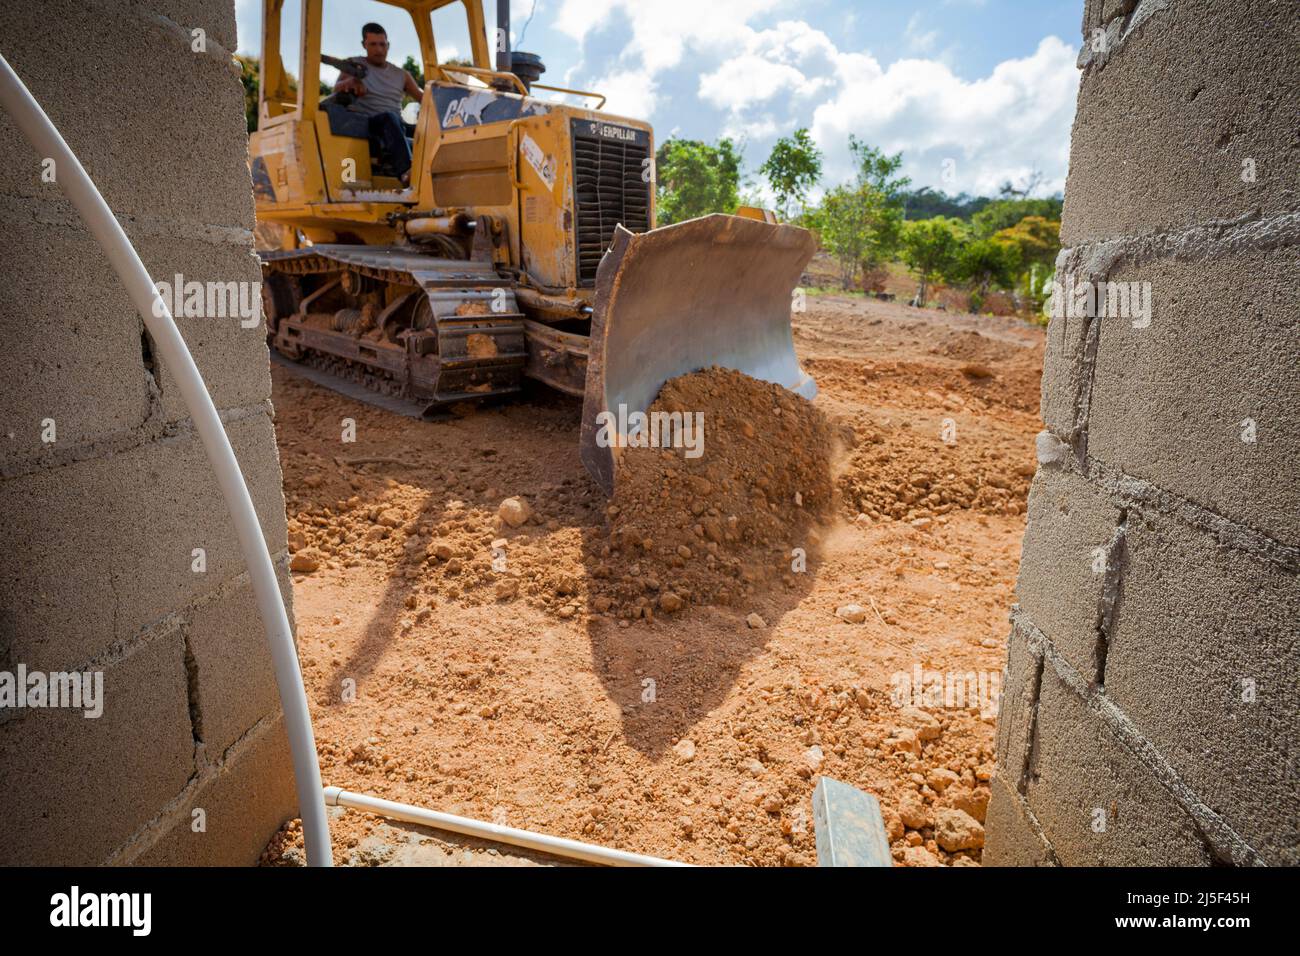 A bulldozer at work on a construction site at Las Minas, Cocle province, Republic of Panama, Central America. Stock Photo